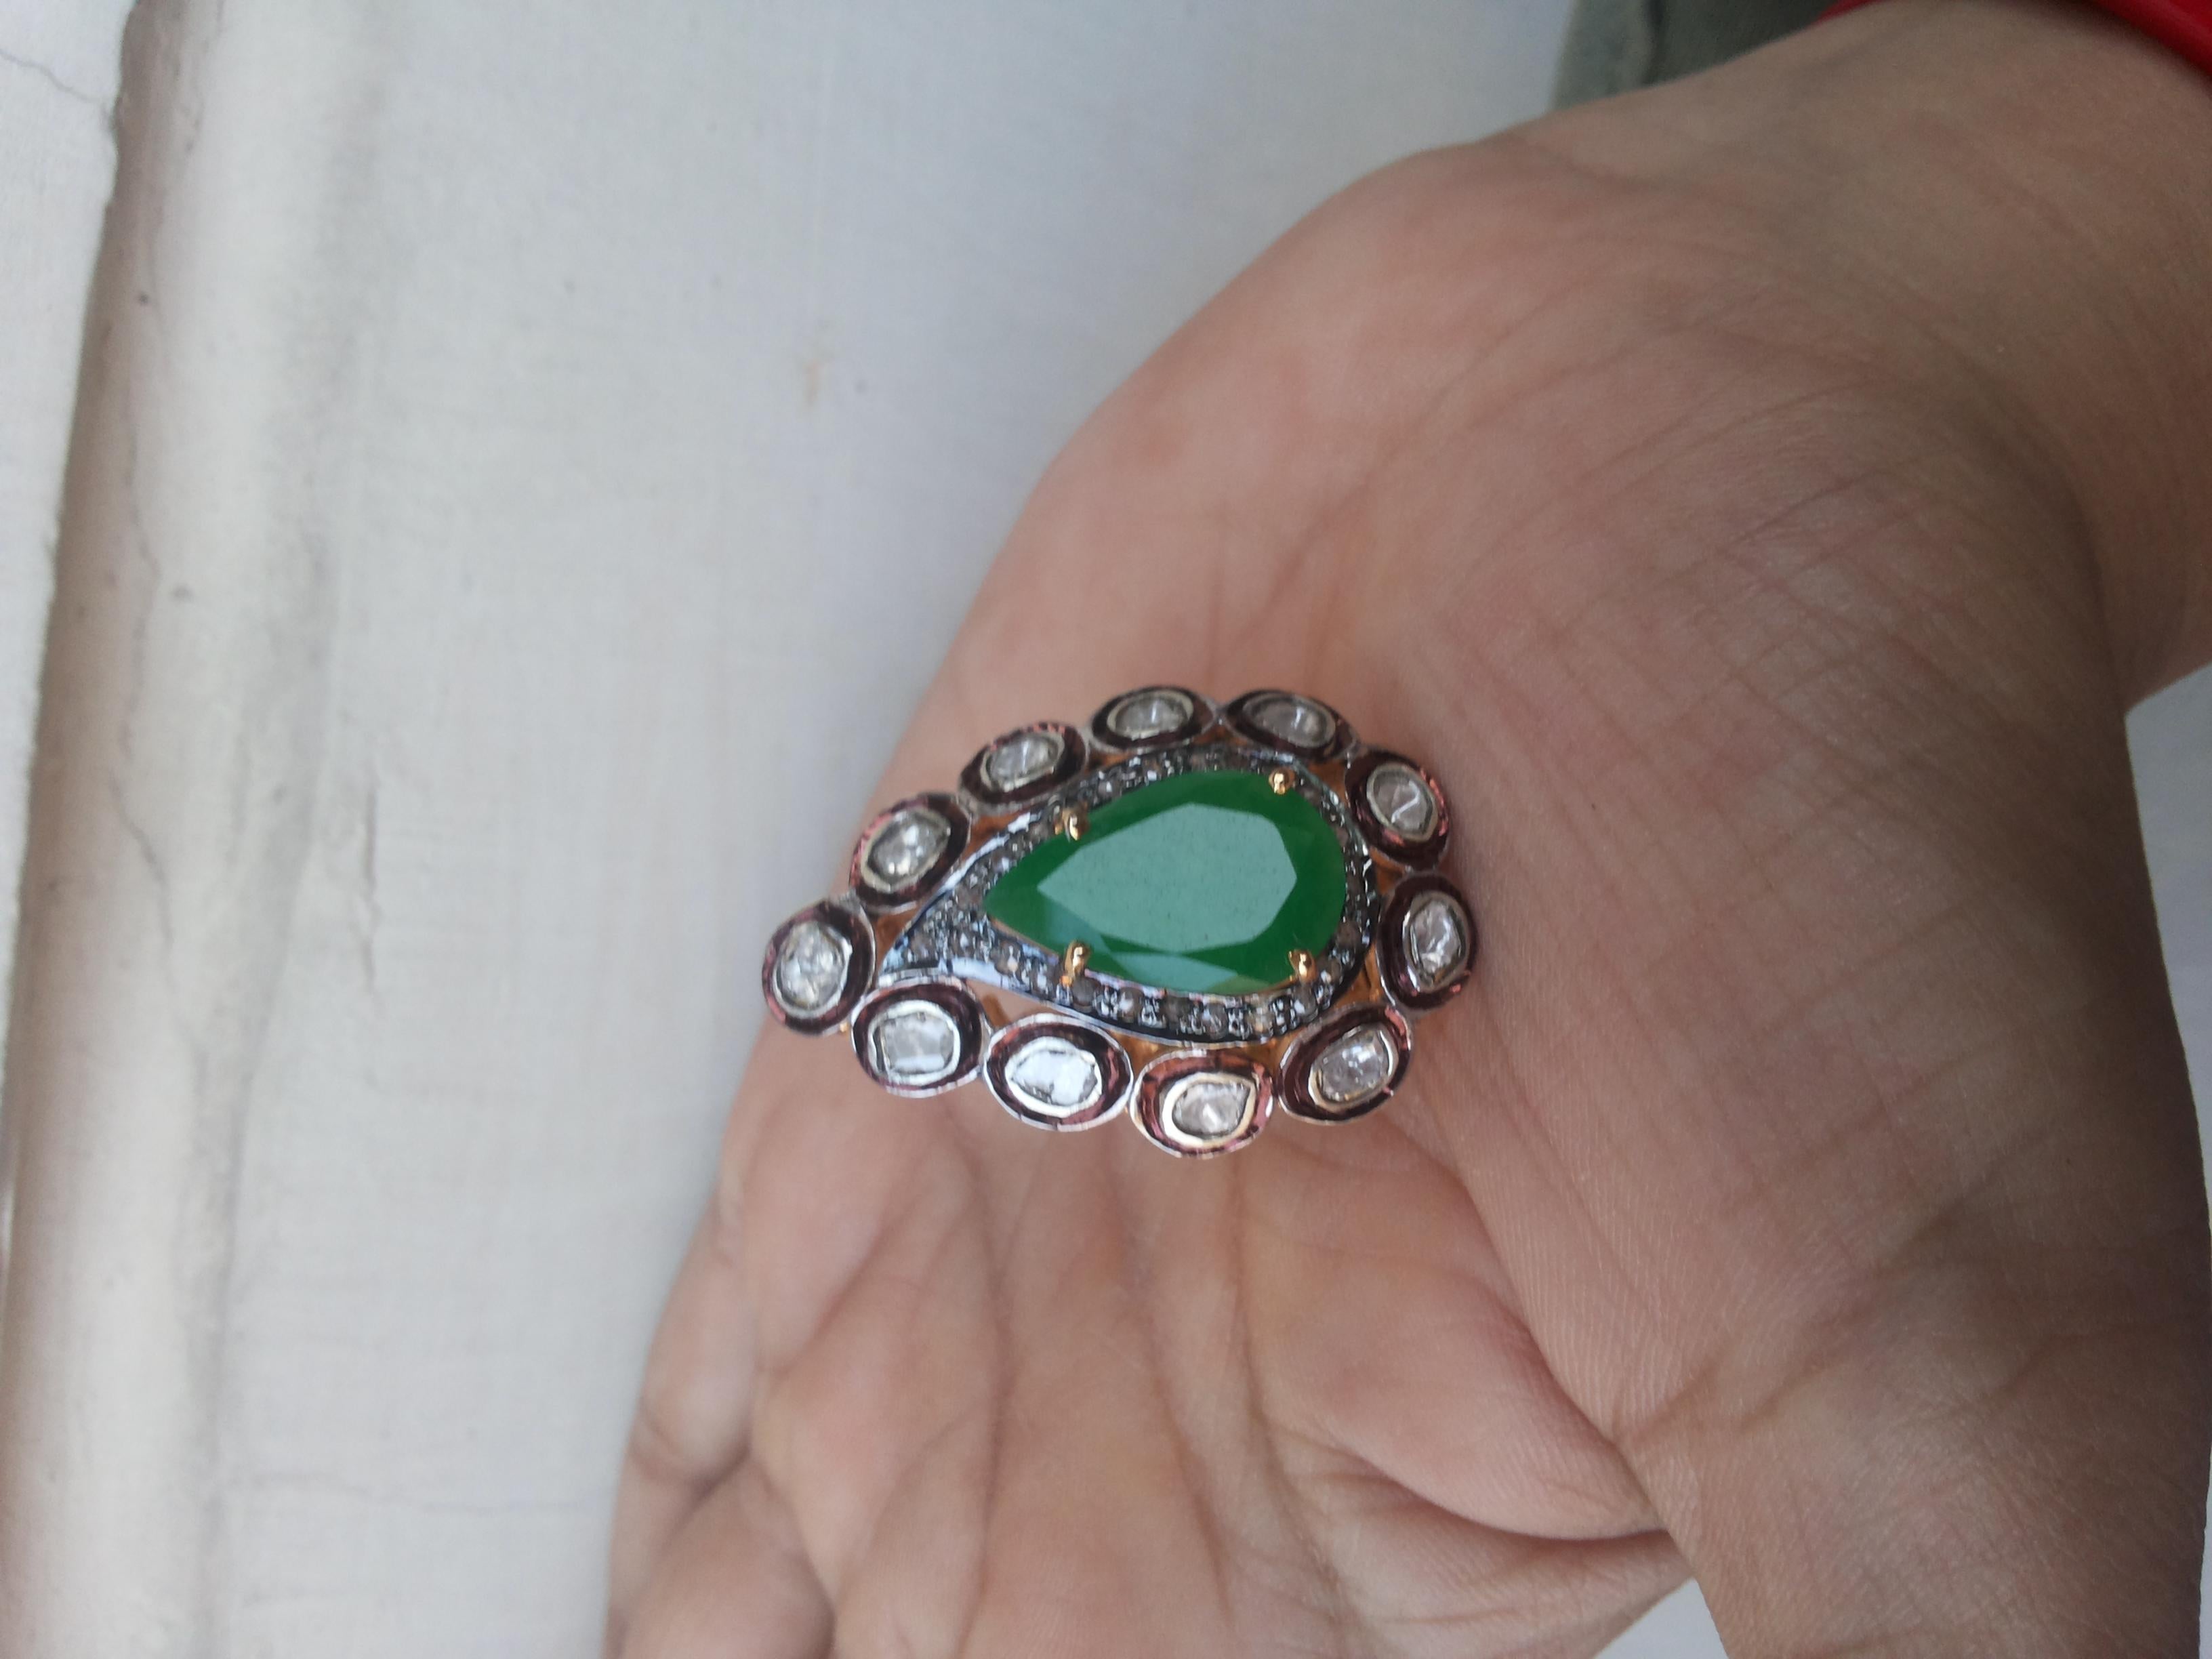 Uncut Certified natural uncut Diamond Ring green onyx sterling silver statement Ring For Sale